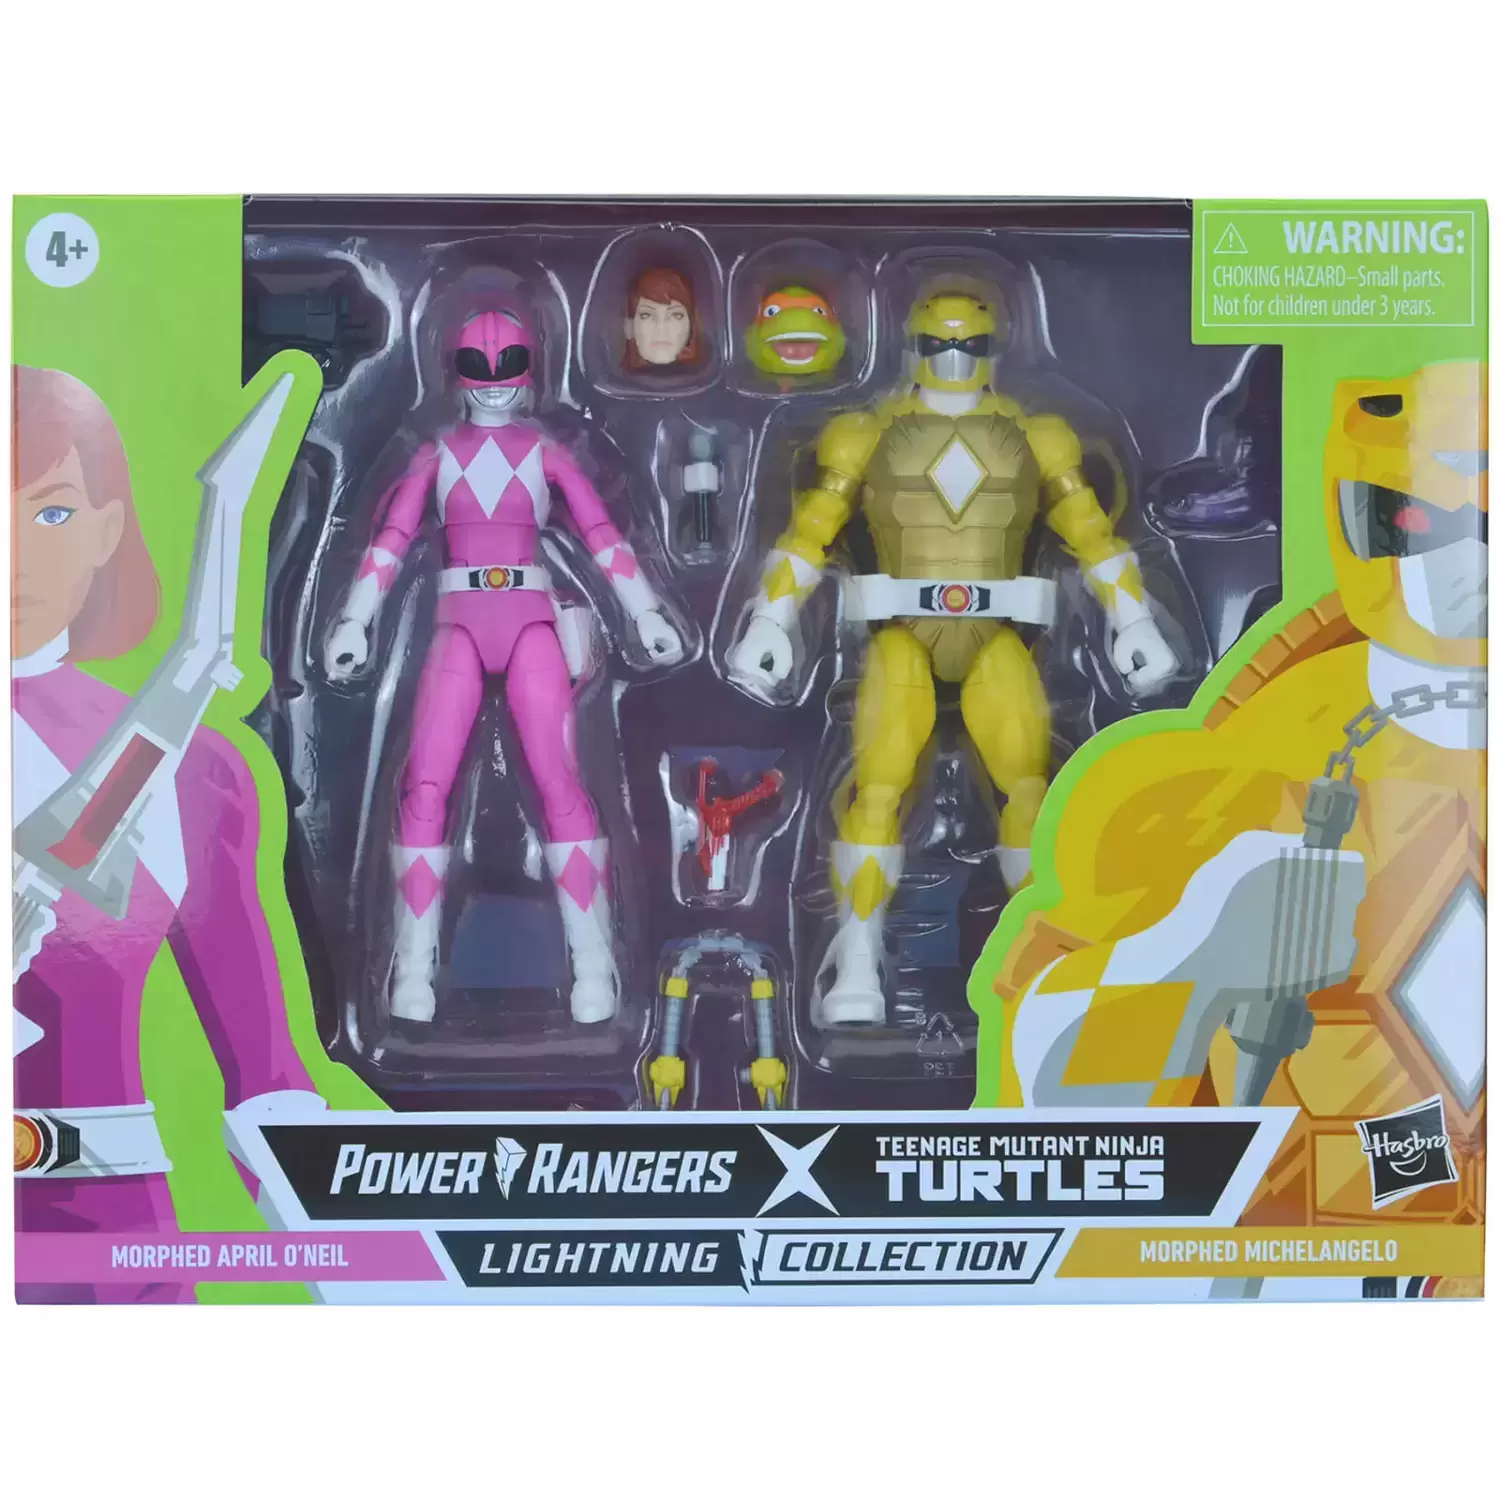 Power Rangers Hasbro - Lightning Collection - Power Rangers X TMNT - Morphed April O’Neil  & Morphed Michelangelo